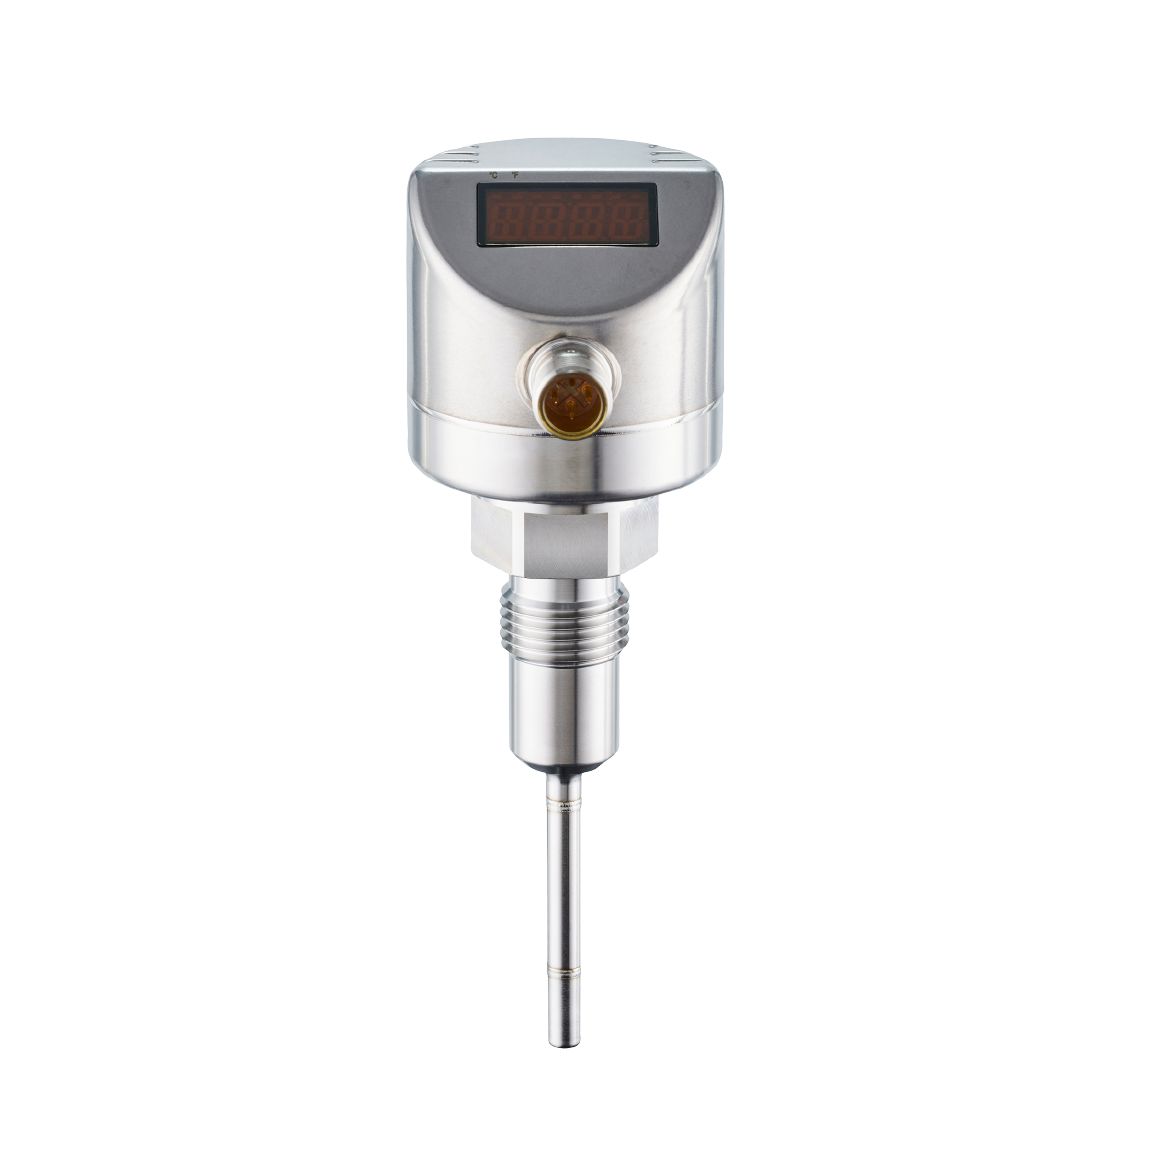 TD2517 - Temperature transmitter with display - ifm